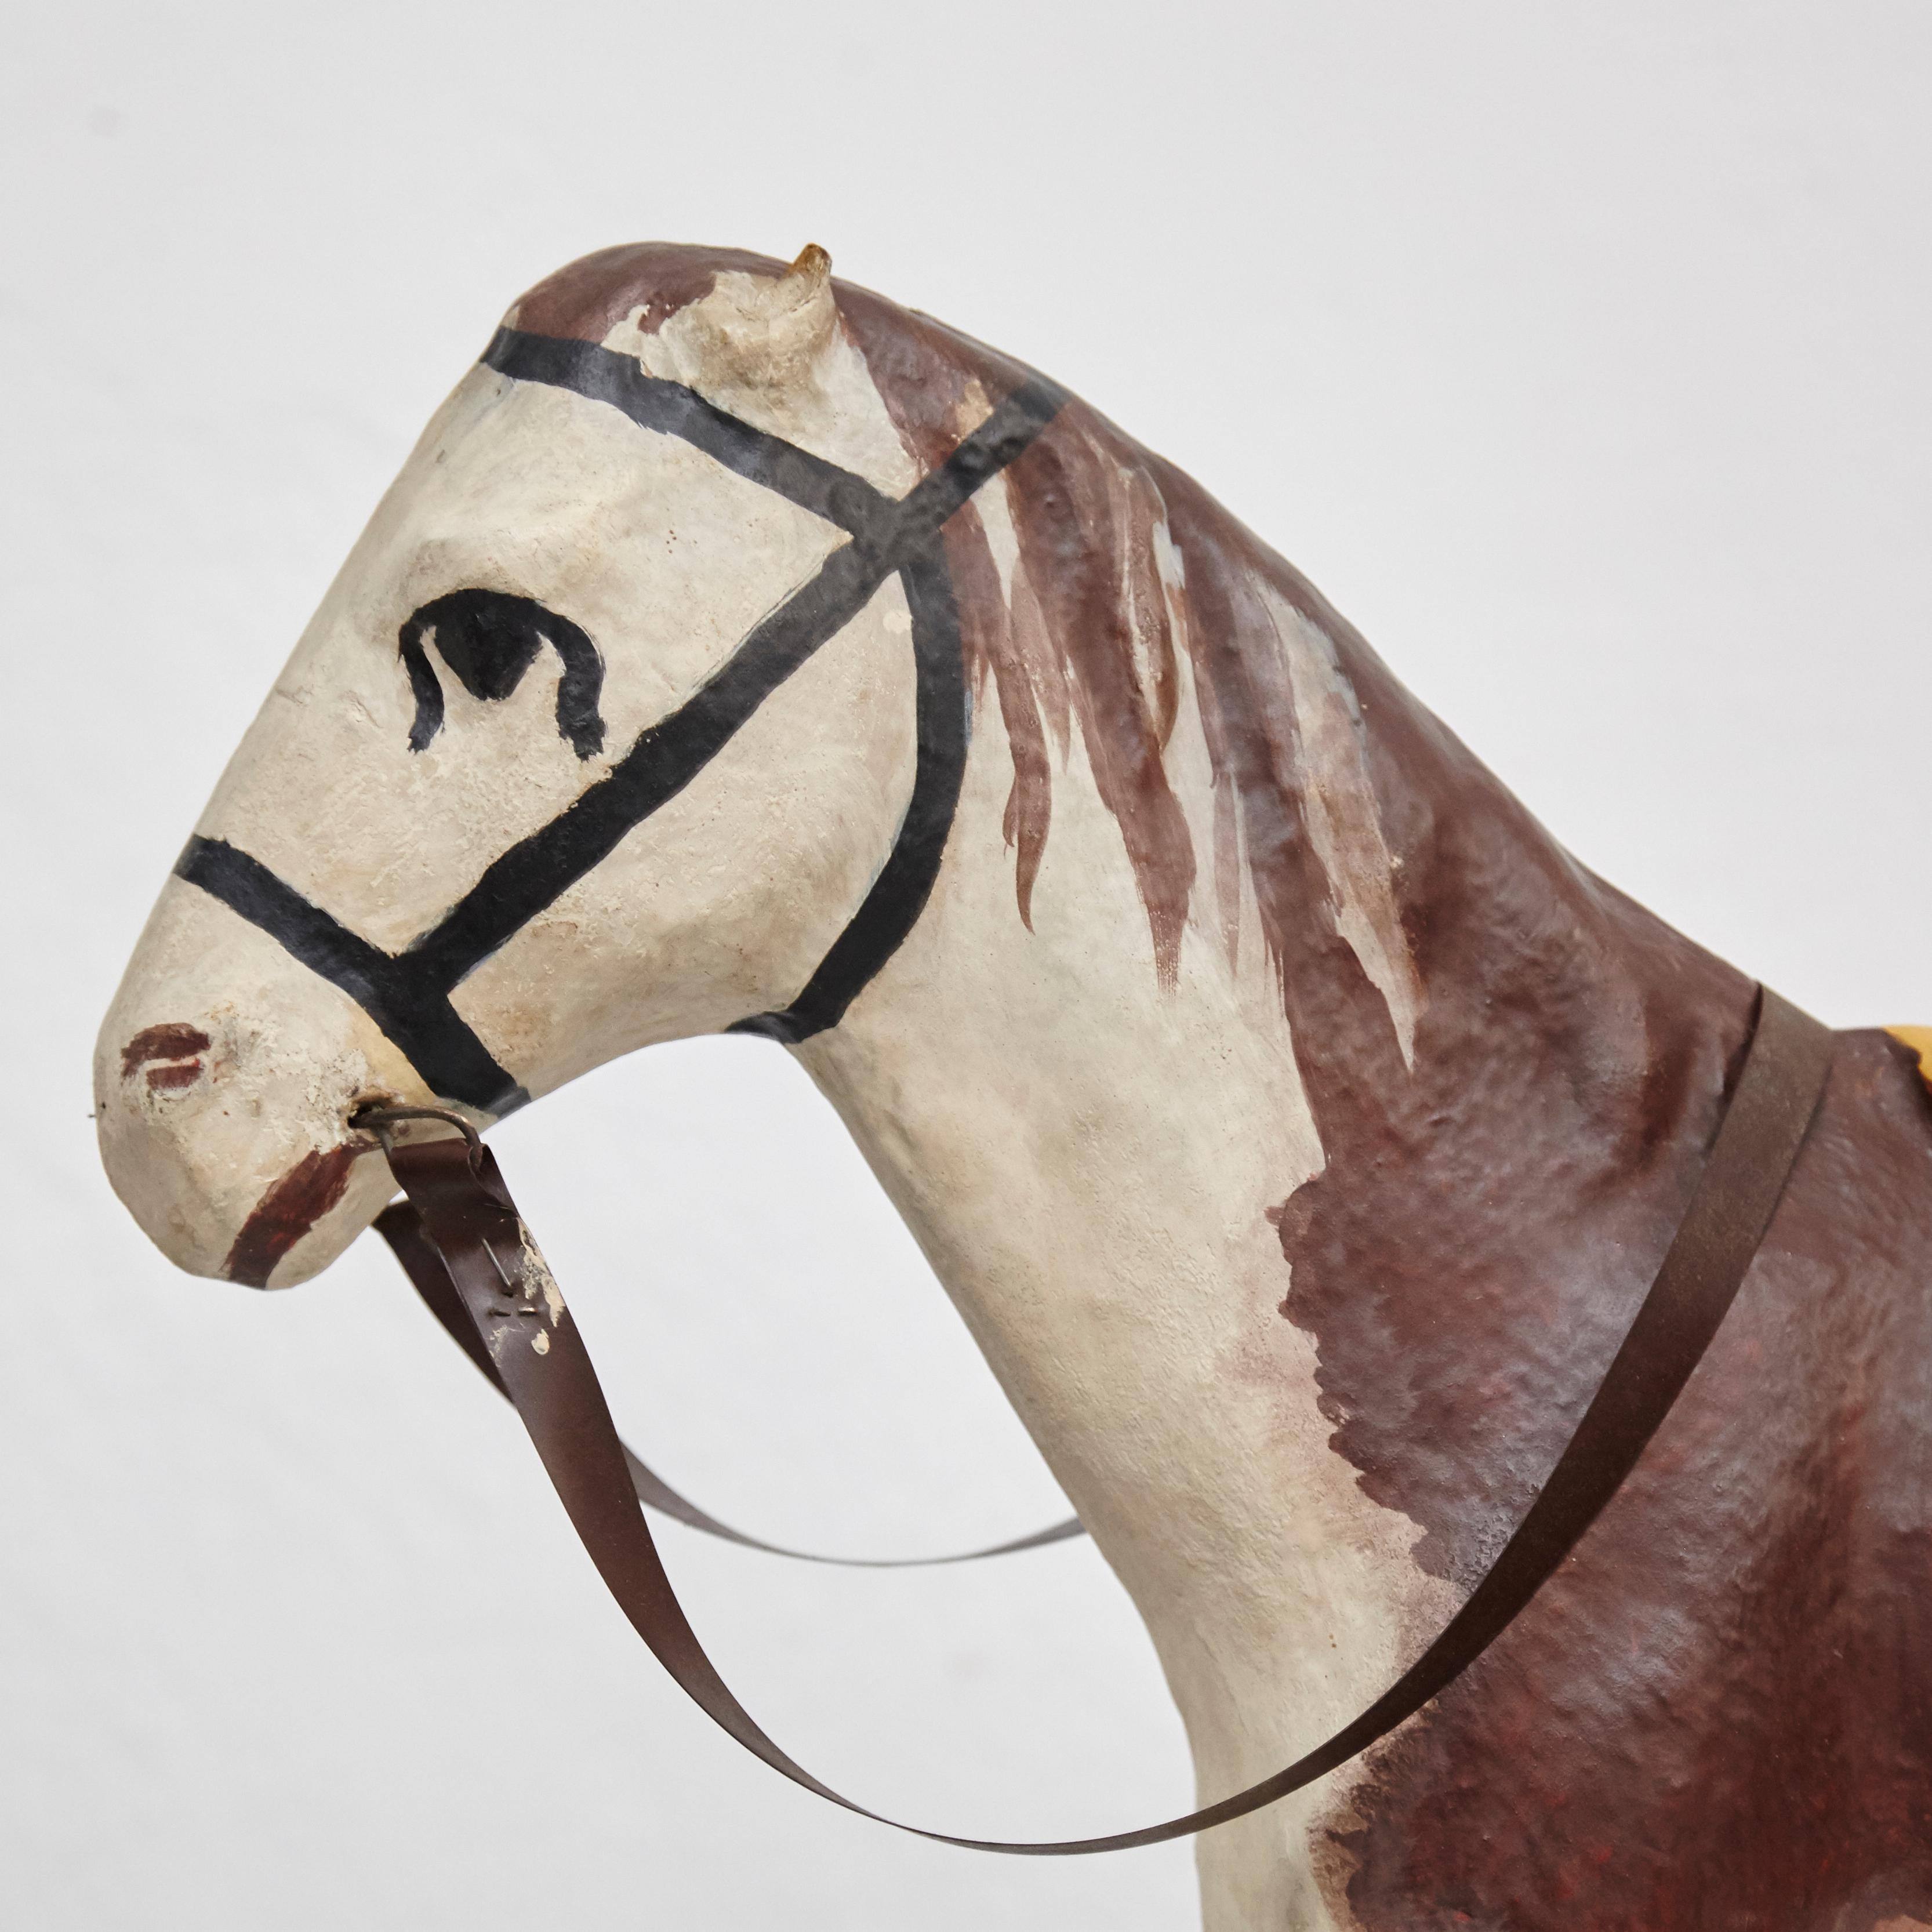 Antique cardboard children's horse.
By unknown author, France, circa 1950.
In original condition, with minor wear consistent with age and use, preserving a beautiful patina.

Materials:
Cardboard
Metal wheels

Dimensions:
D 58 cm x W 18 cm